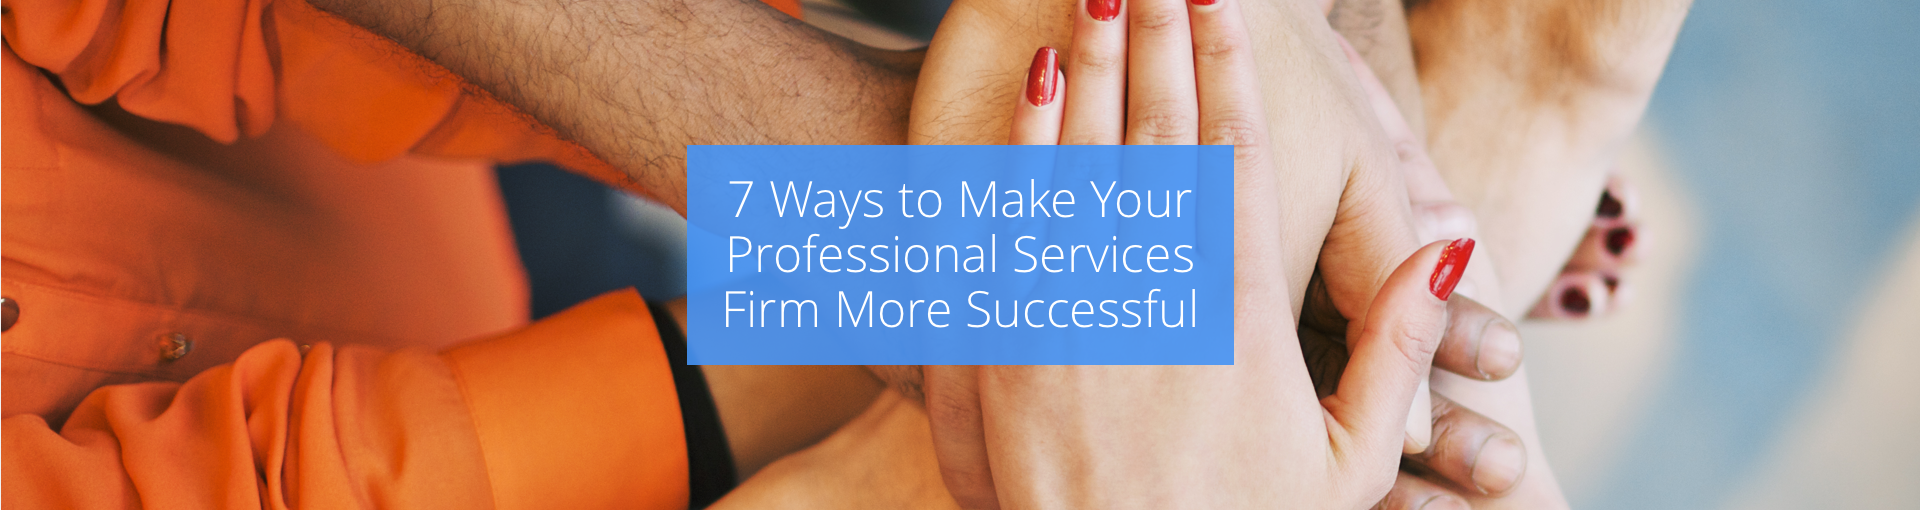 7 Ways to Make Your Professional Services Firm More Successful